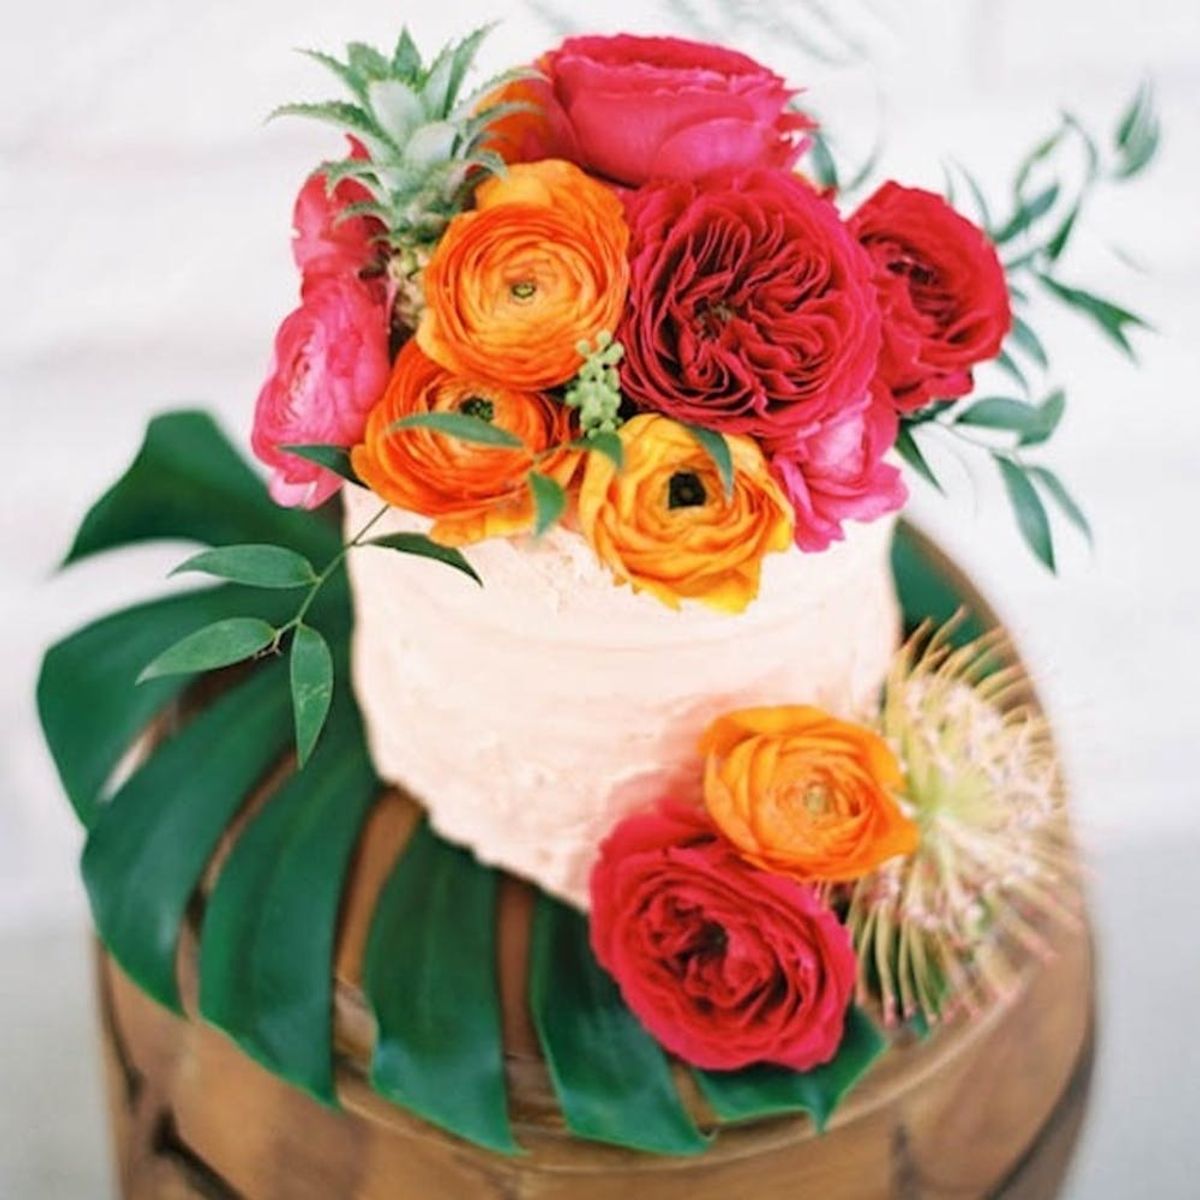 17 Tropical Wedding Cakes Perfect for Summer Weddings